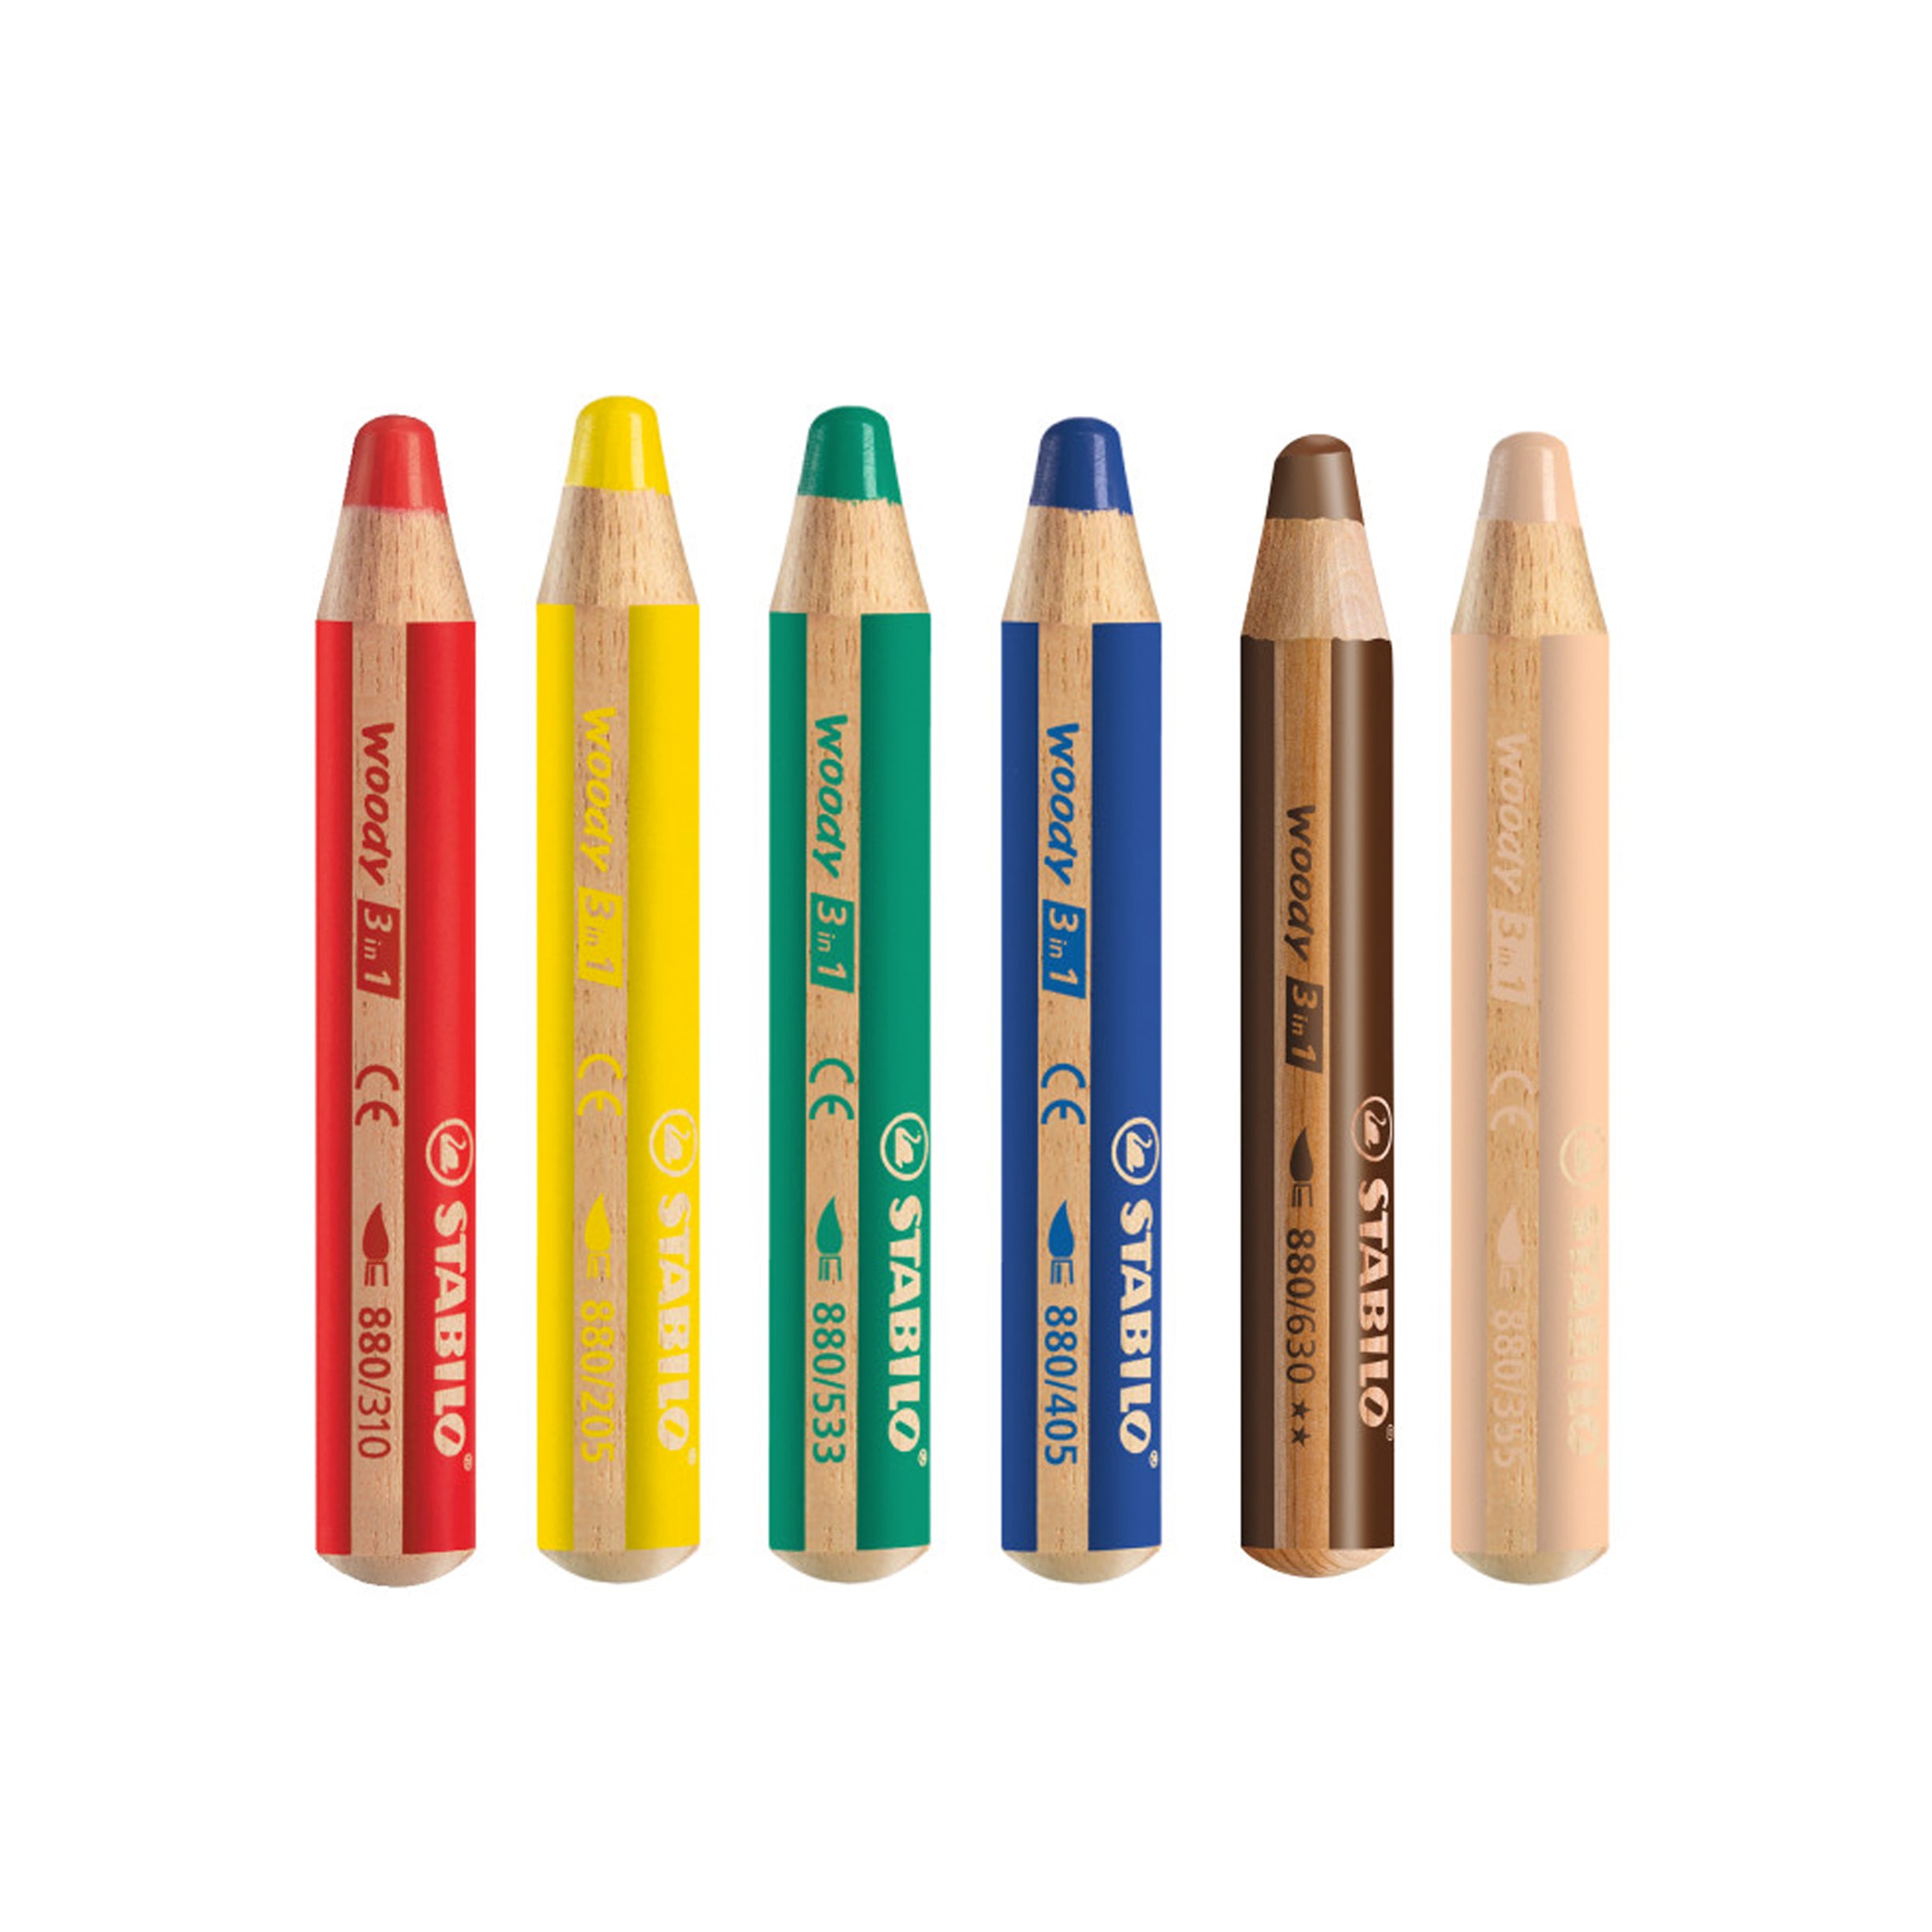 Multi-talented pencil STABILO woody 3 in 1 - pack of 6